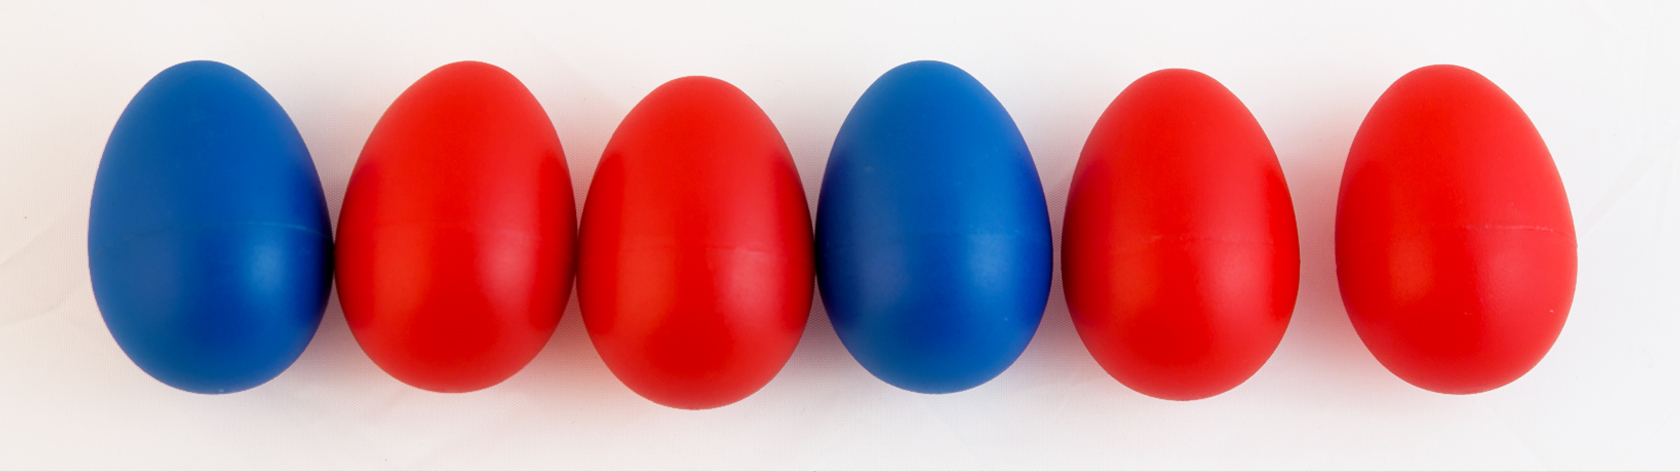 Red and blue plastic eggs organized in a pattern